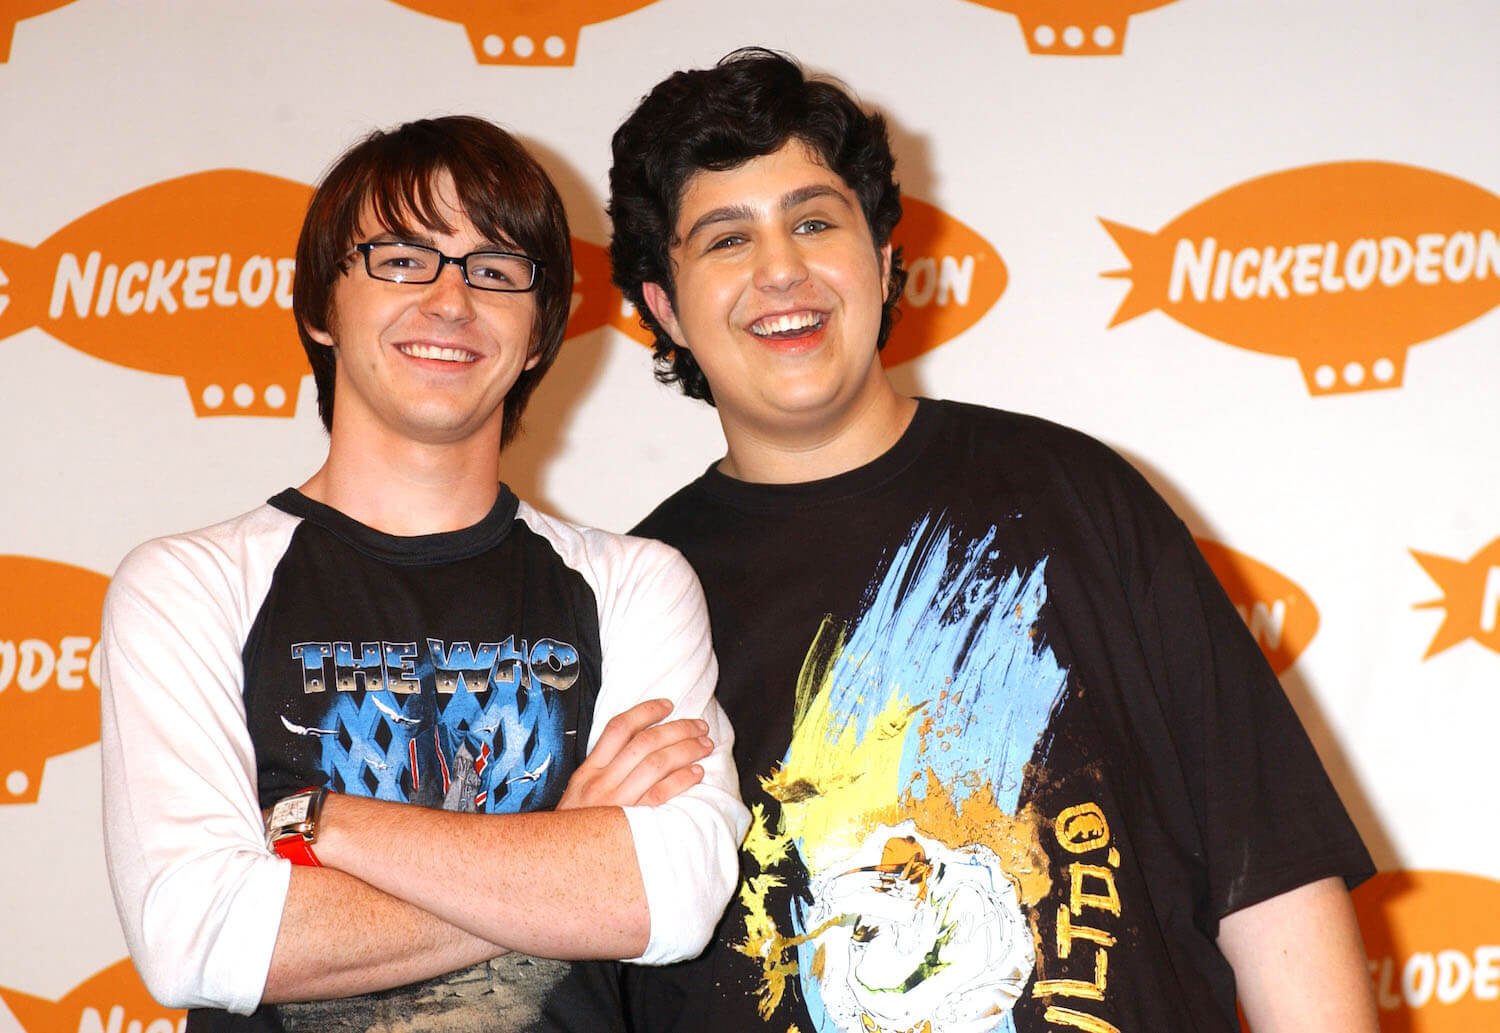 Drake Bell and Josh Peck from Nickelodeon's 'Drake & Josh' smiling at a network event